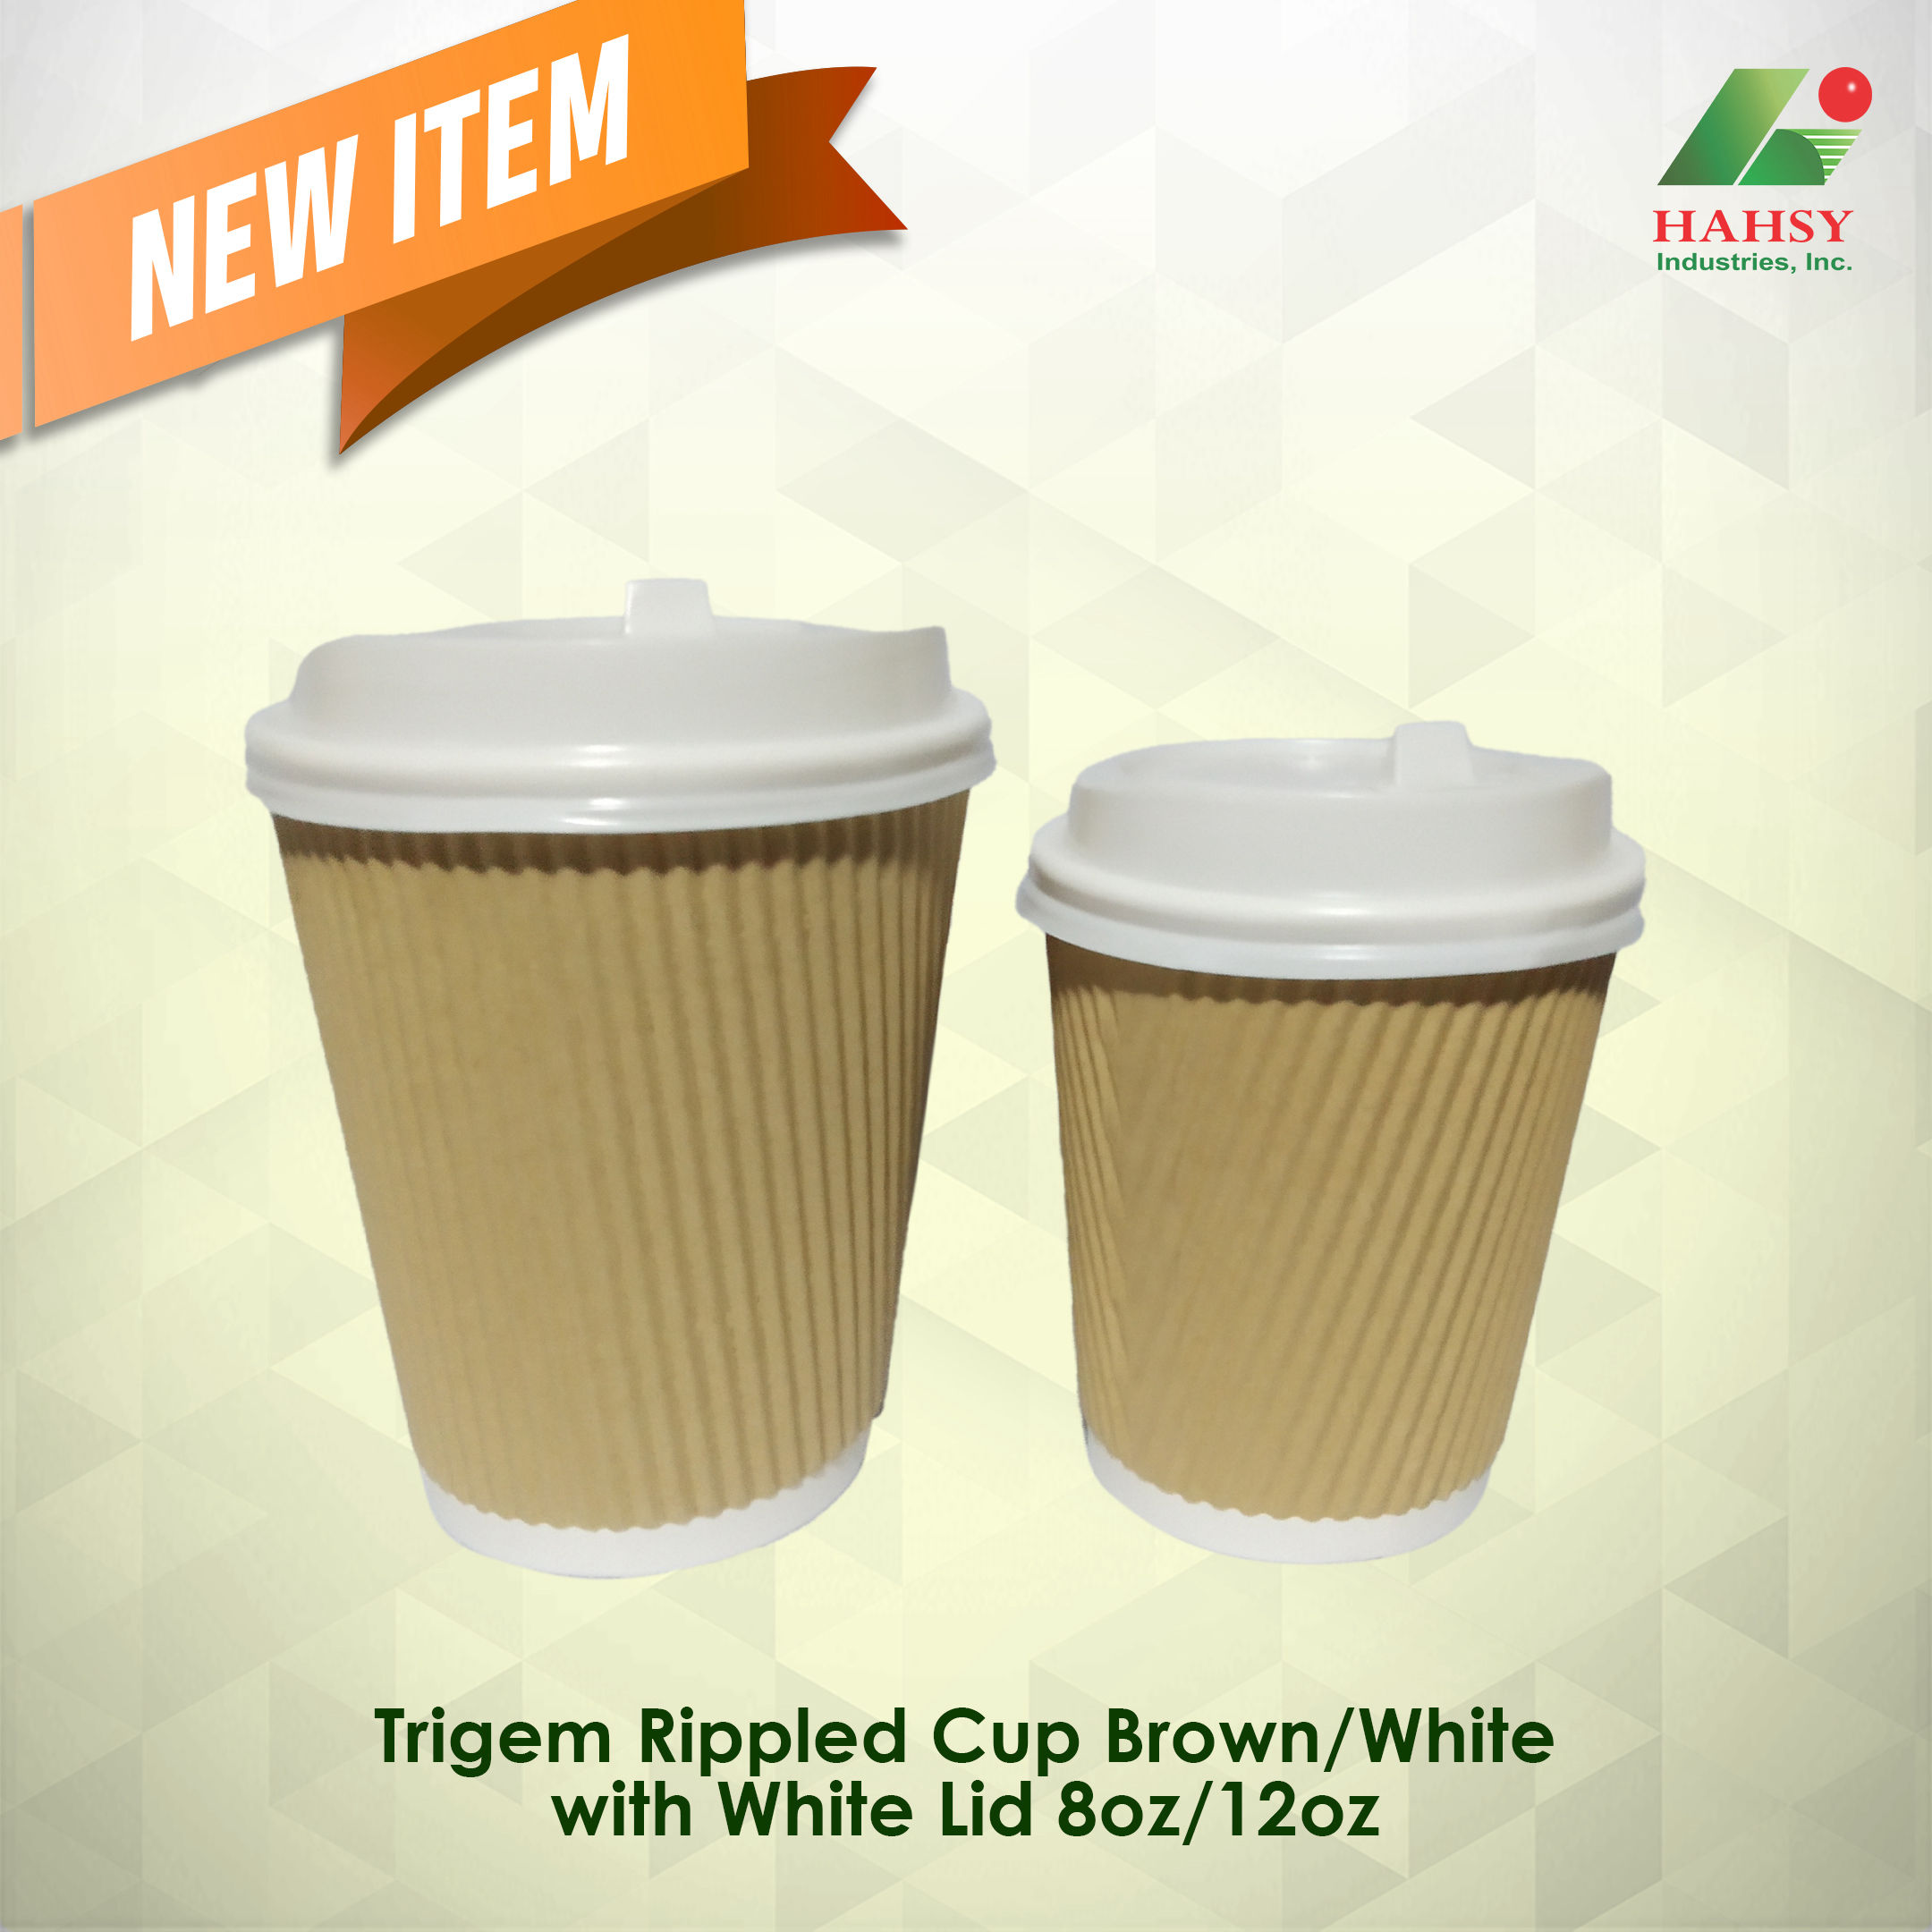 Trigem Rippled cup brown with white lid 8oz 12oz